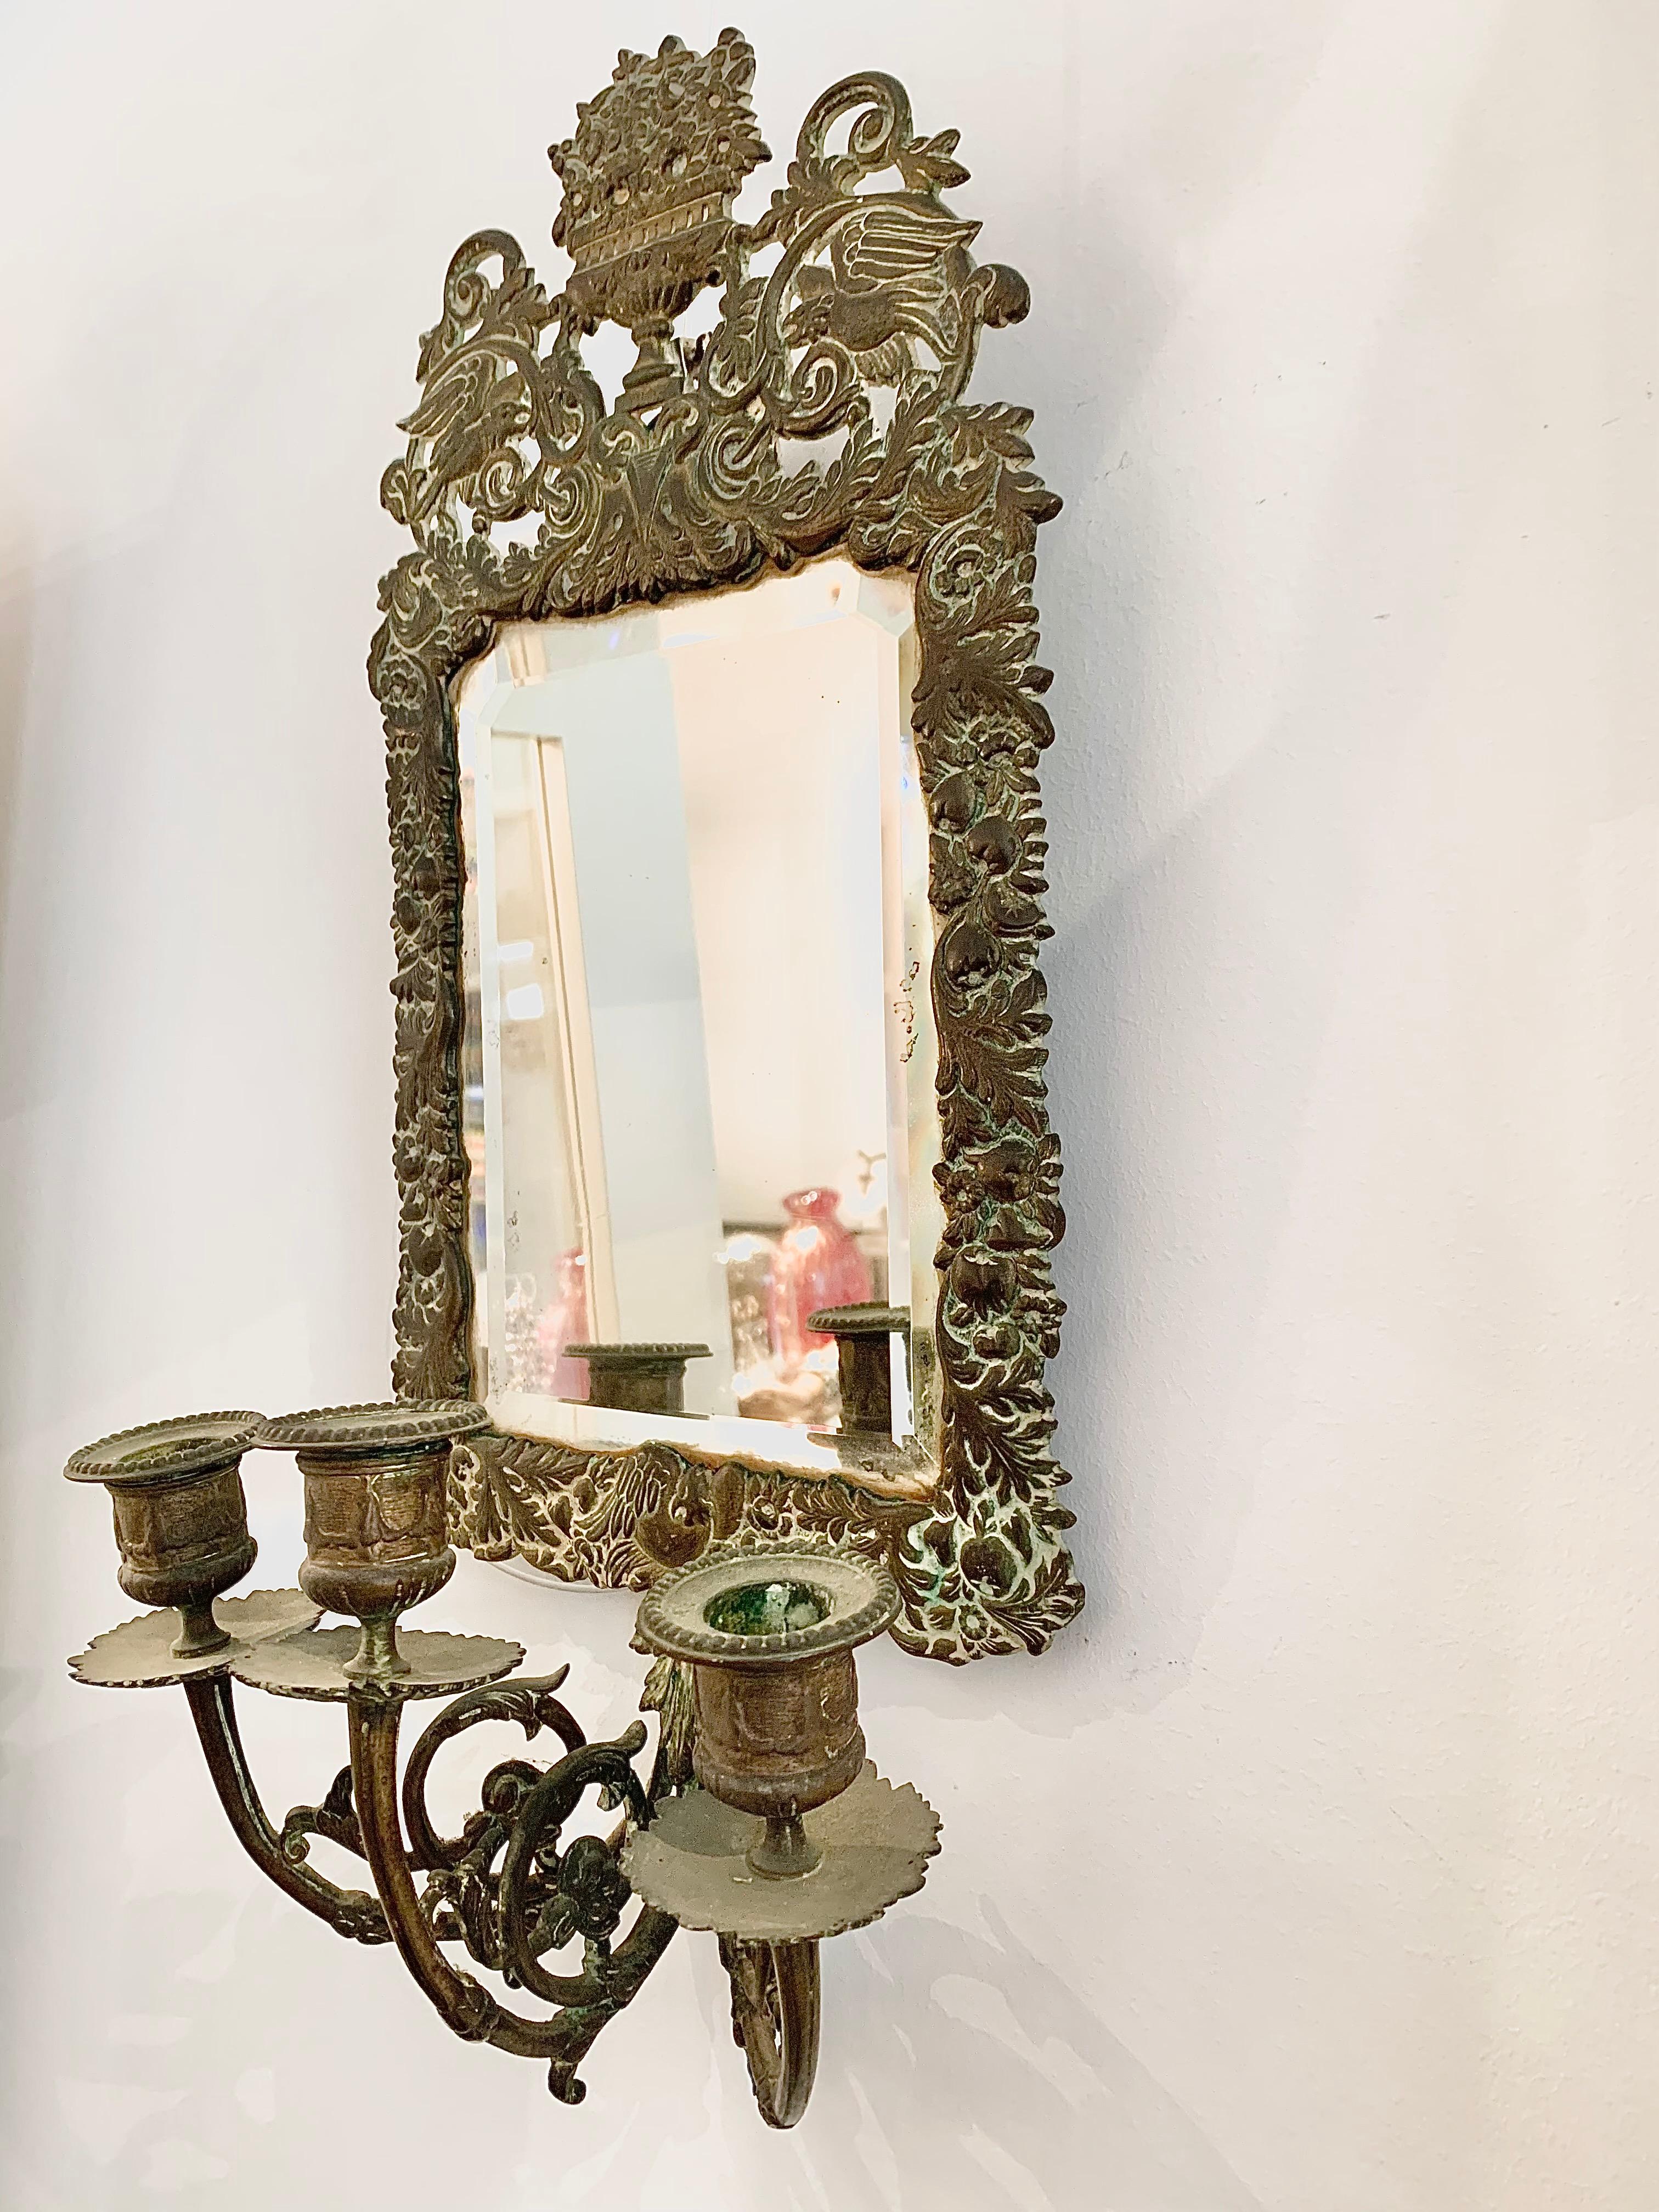 Late 18th Century Antique 18th Century Double Eagle Wall Mirrors Candle Sconces Repoussé Brass For Sale